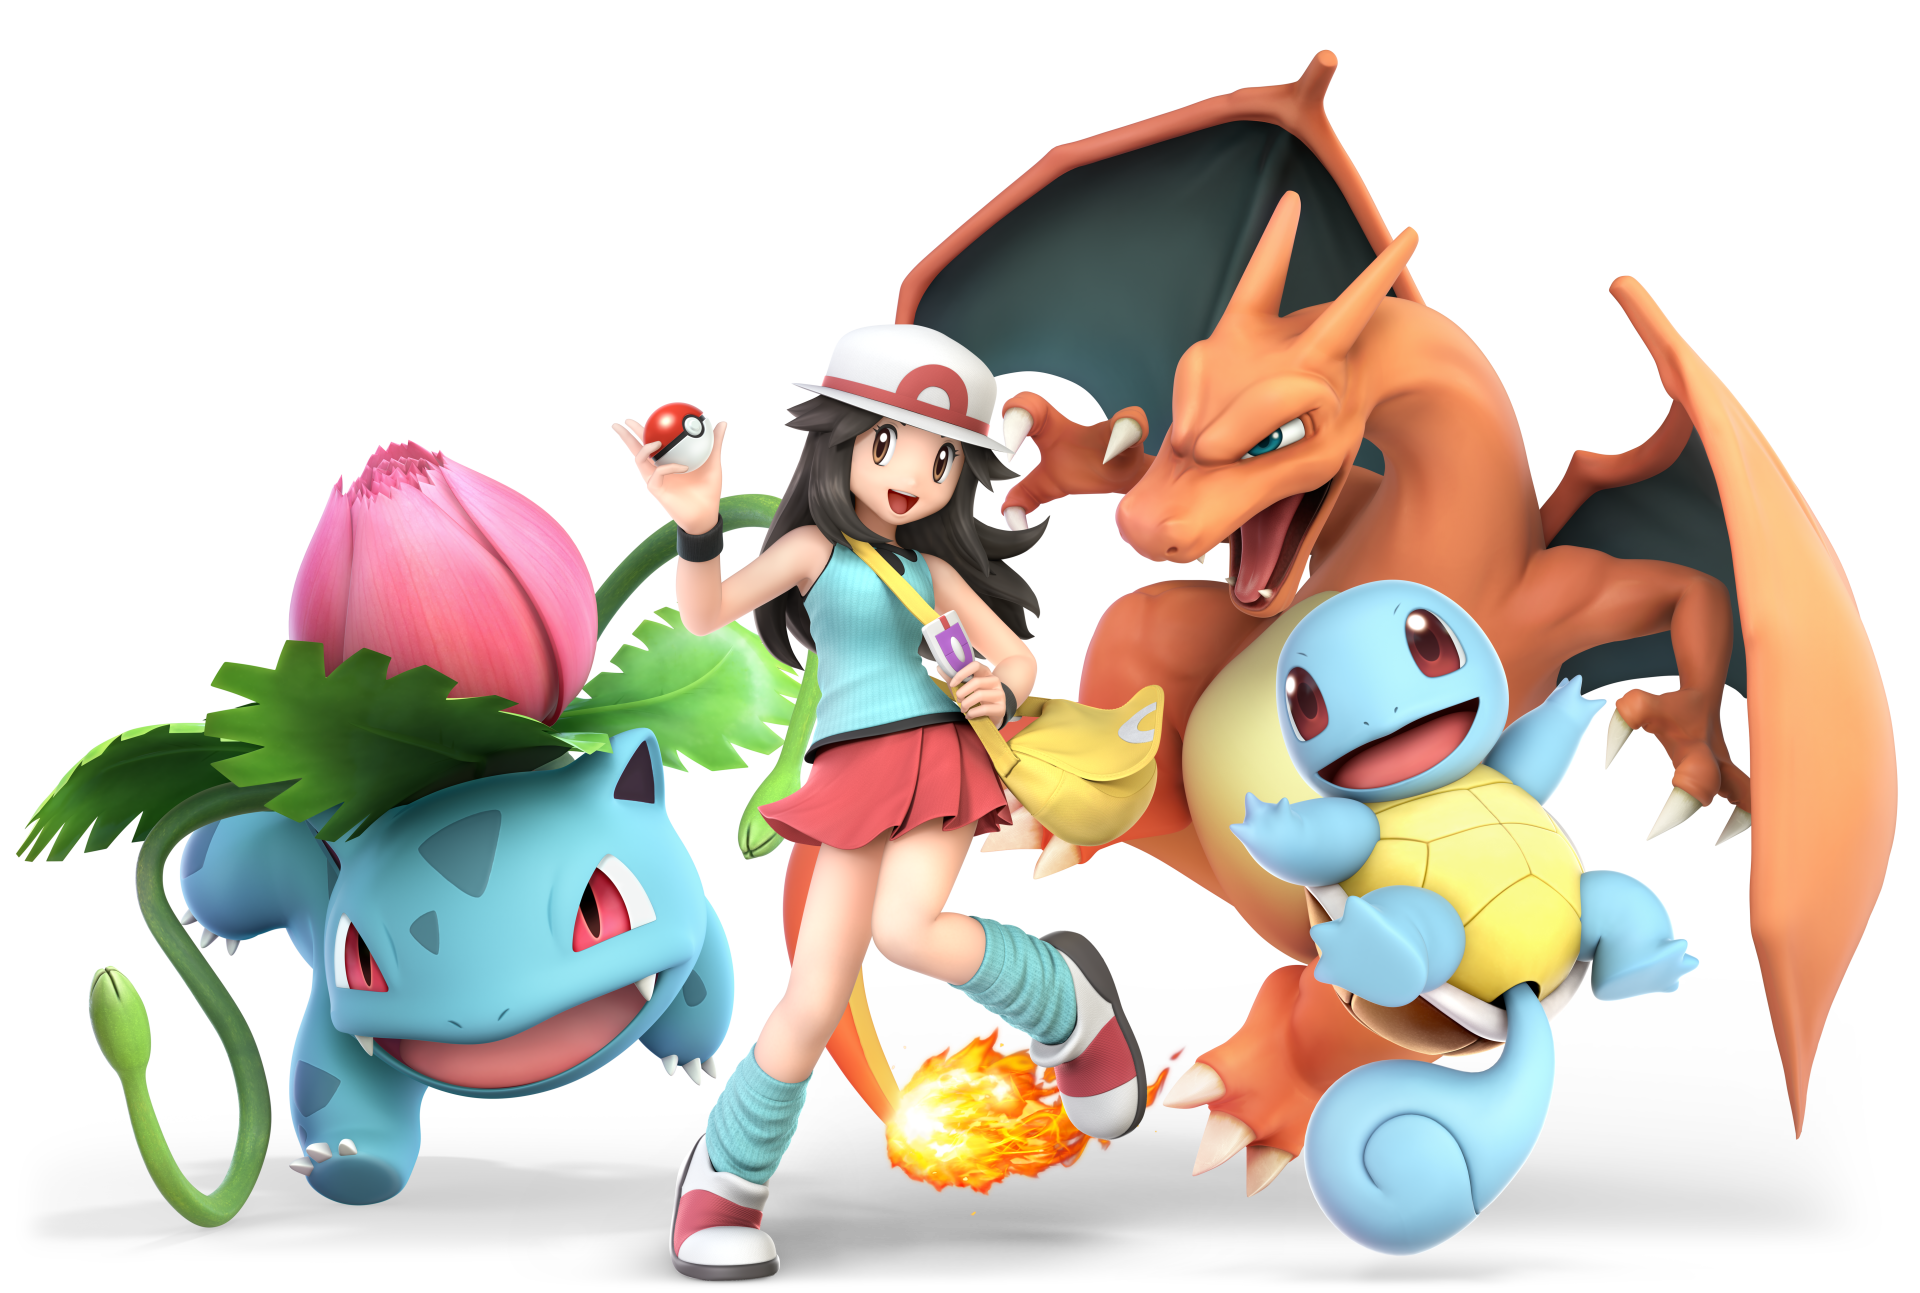 Pokémon Trainer Female Render From Super Smash Bros Ultimate Art Id 116339 Art Abyss 4021